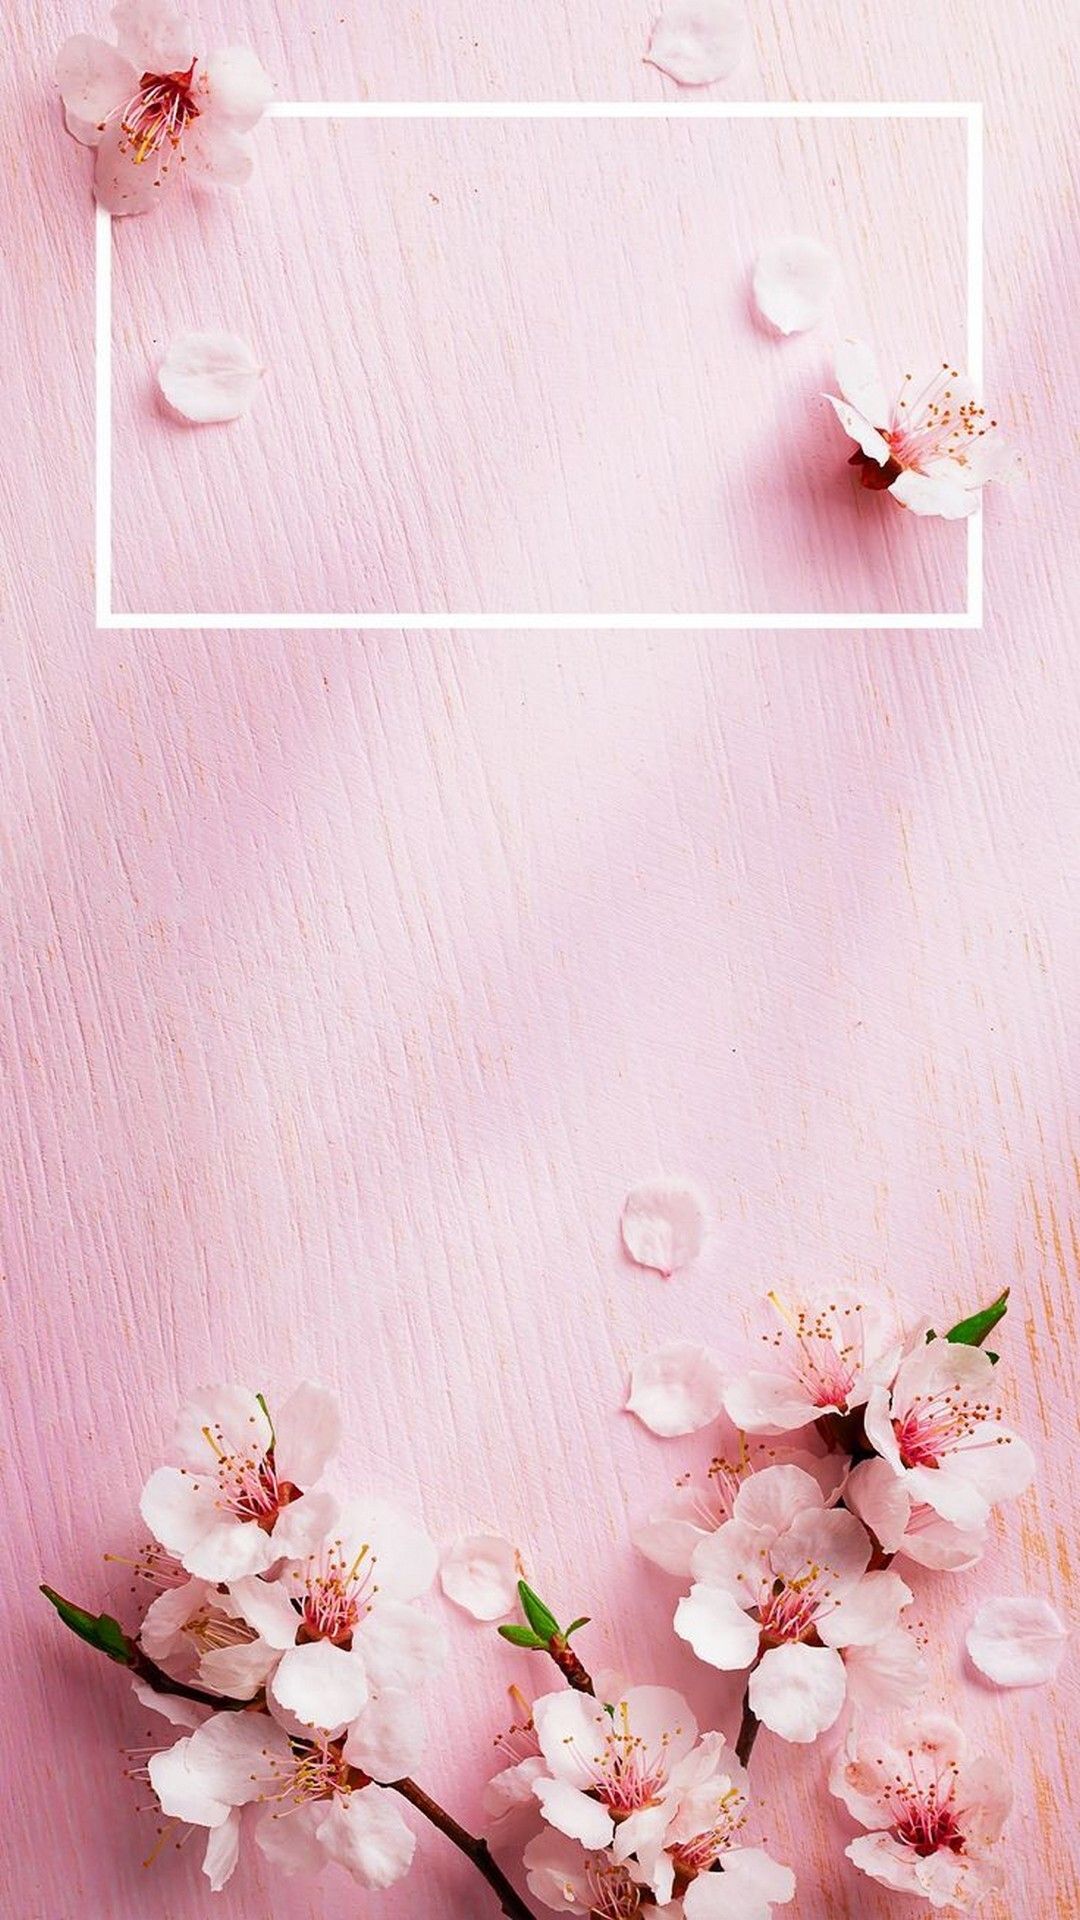 Rose Gold Wallpaper for iPhone - 25 Gorgeous Backgrounds